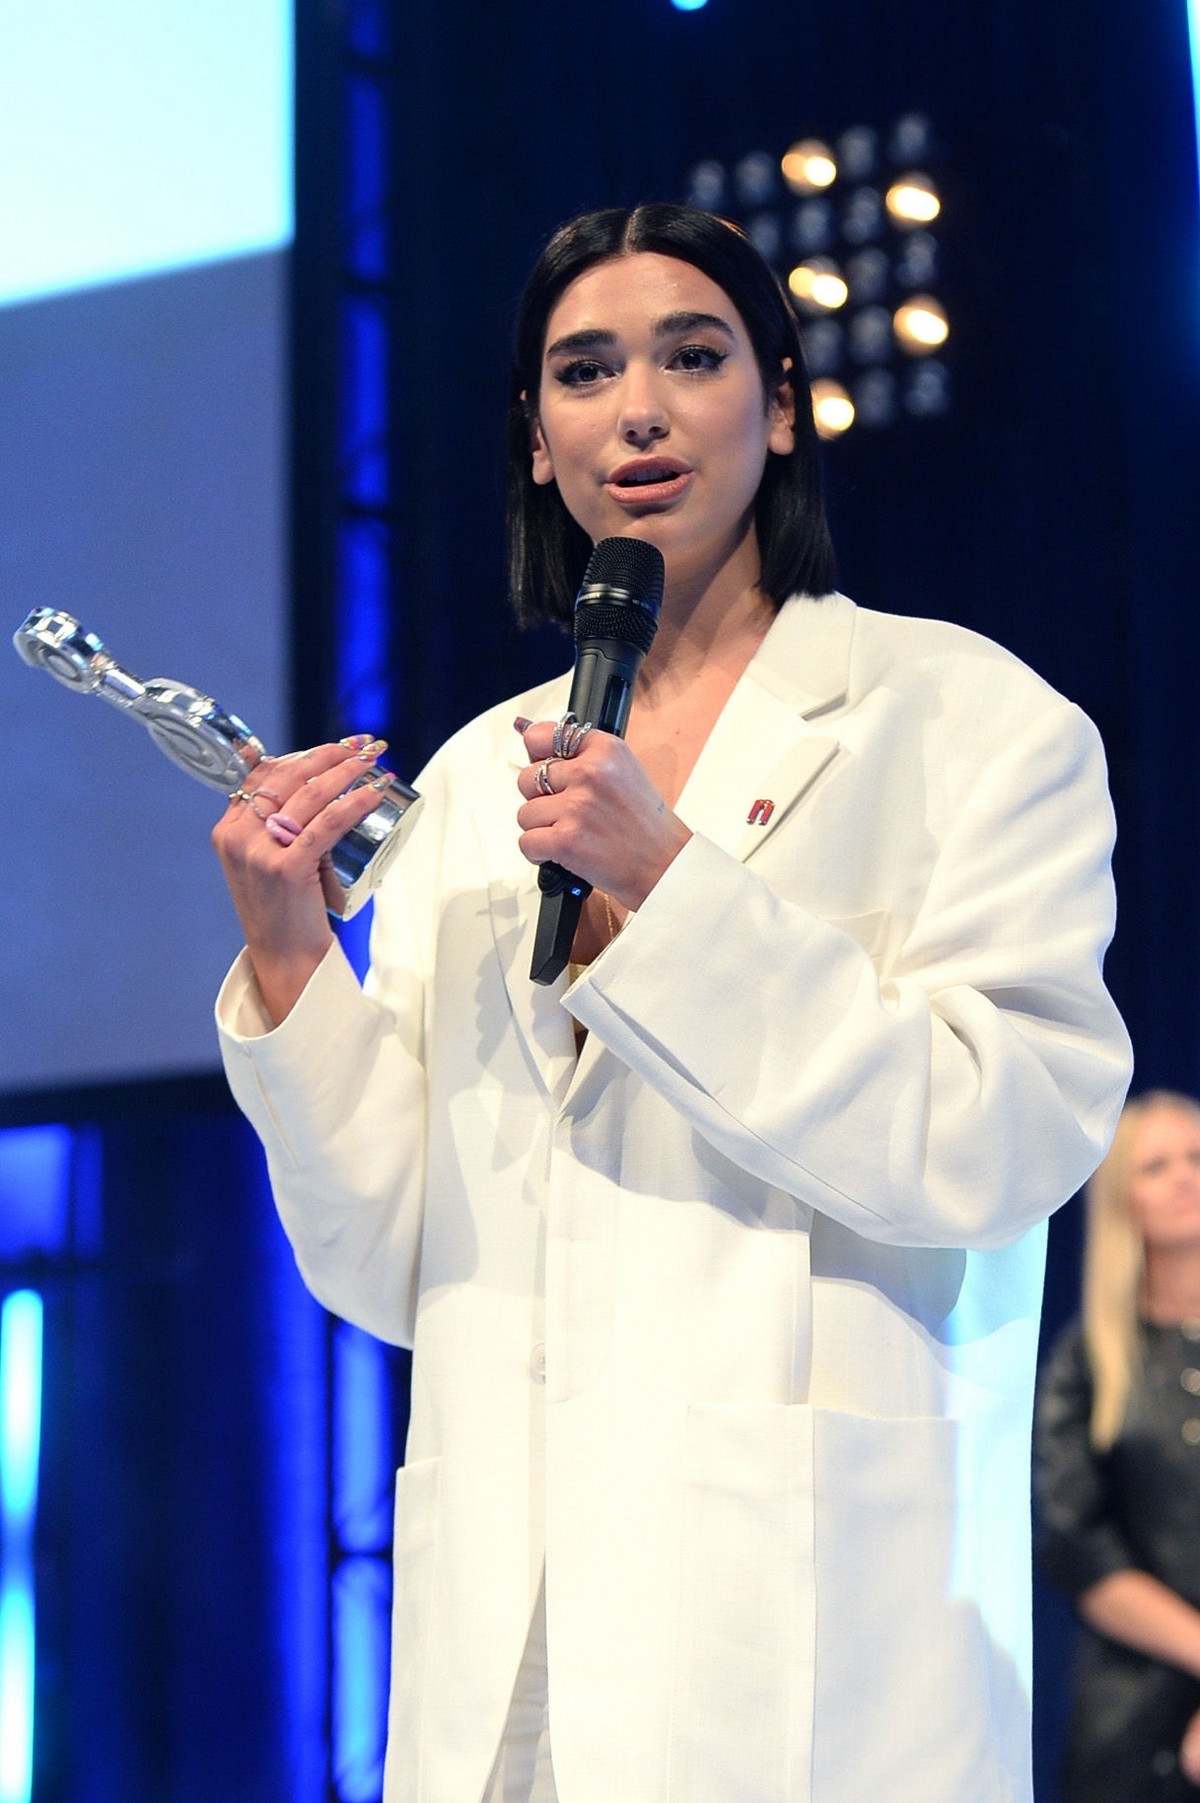 Dua Lipa wins The O2 Silver Clef Awards at the Grosvenor House in London 2019/07/05